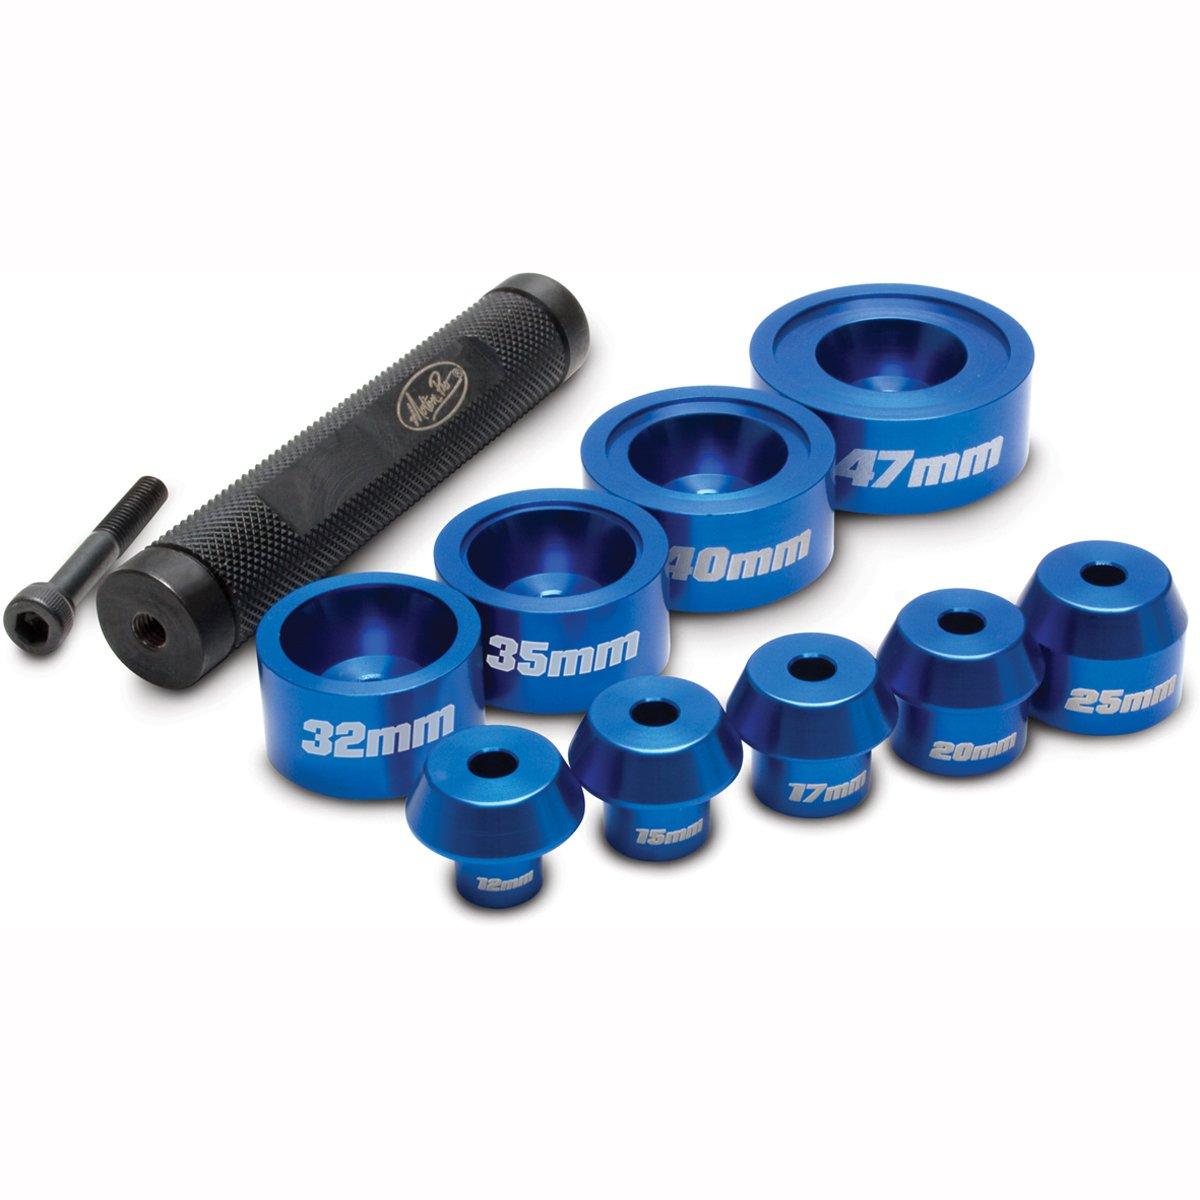 Motion Pro Bearing Driver Set With Carry Case - 12-25mm ID & 32-47mm OD - Browse our range of Care: Tools - getgearedshop 